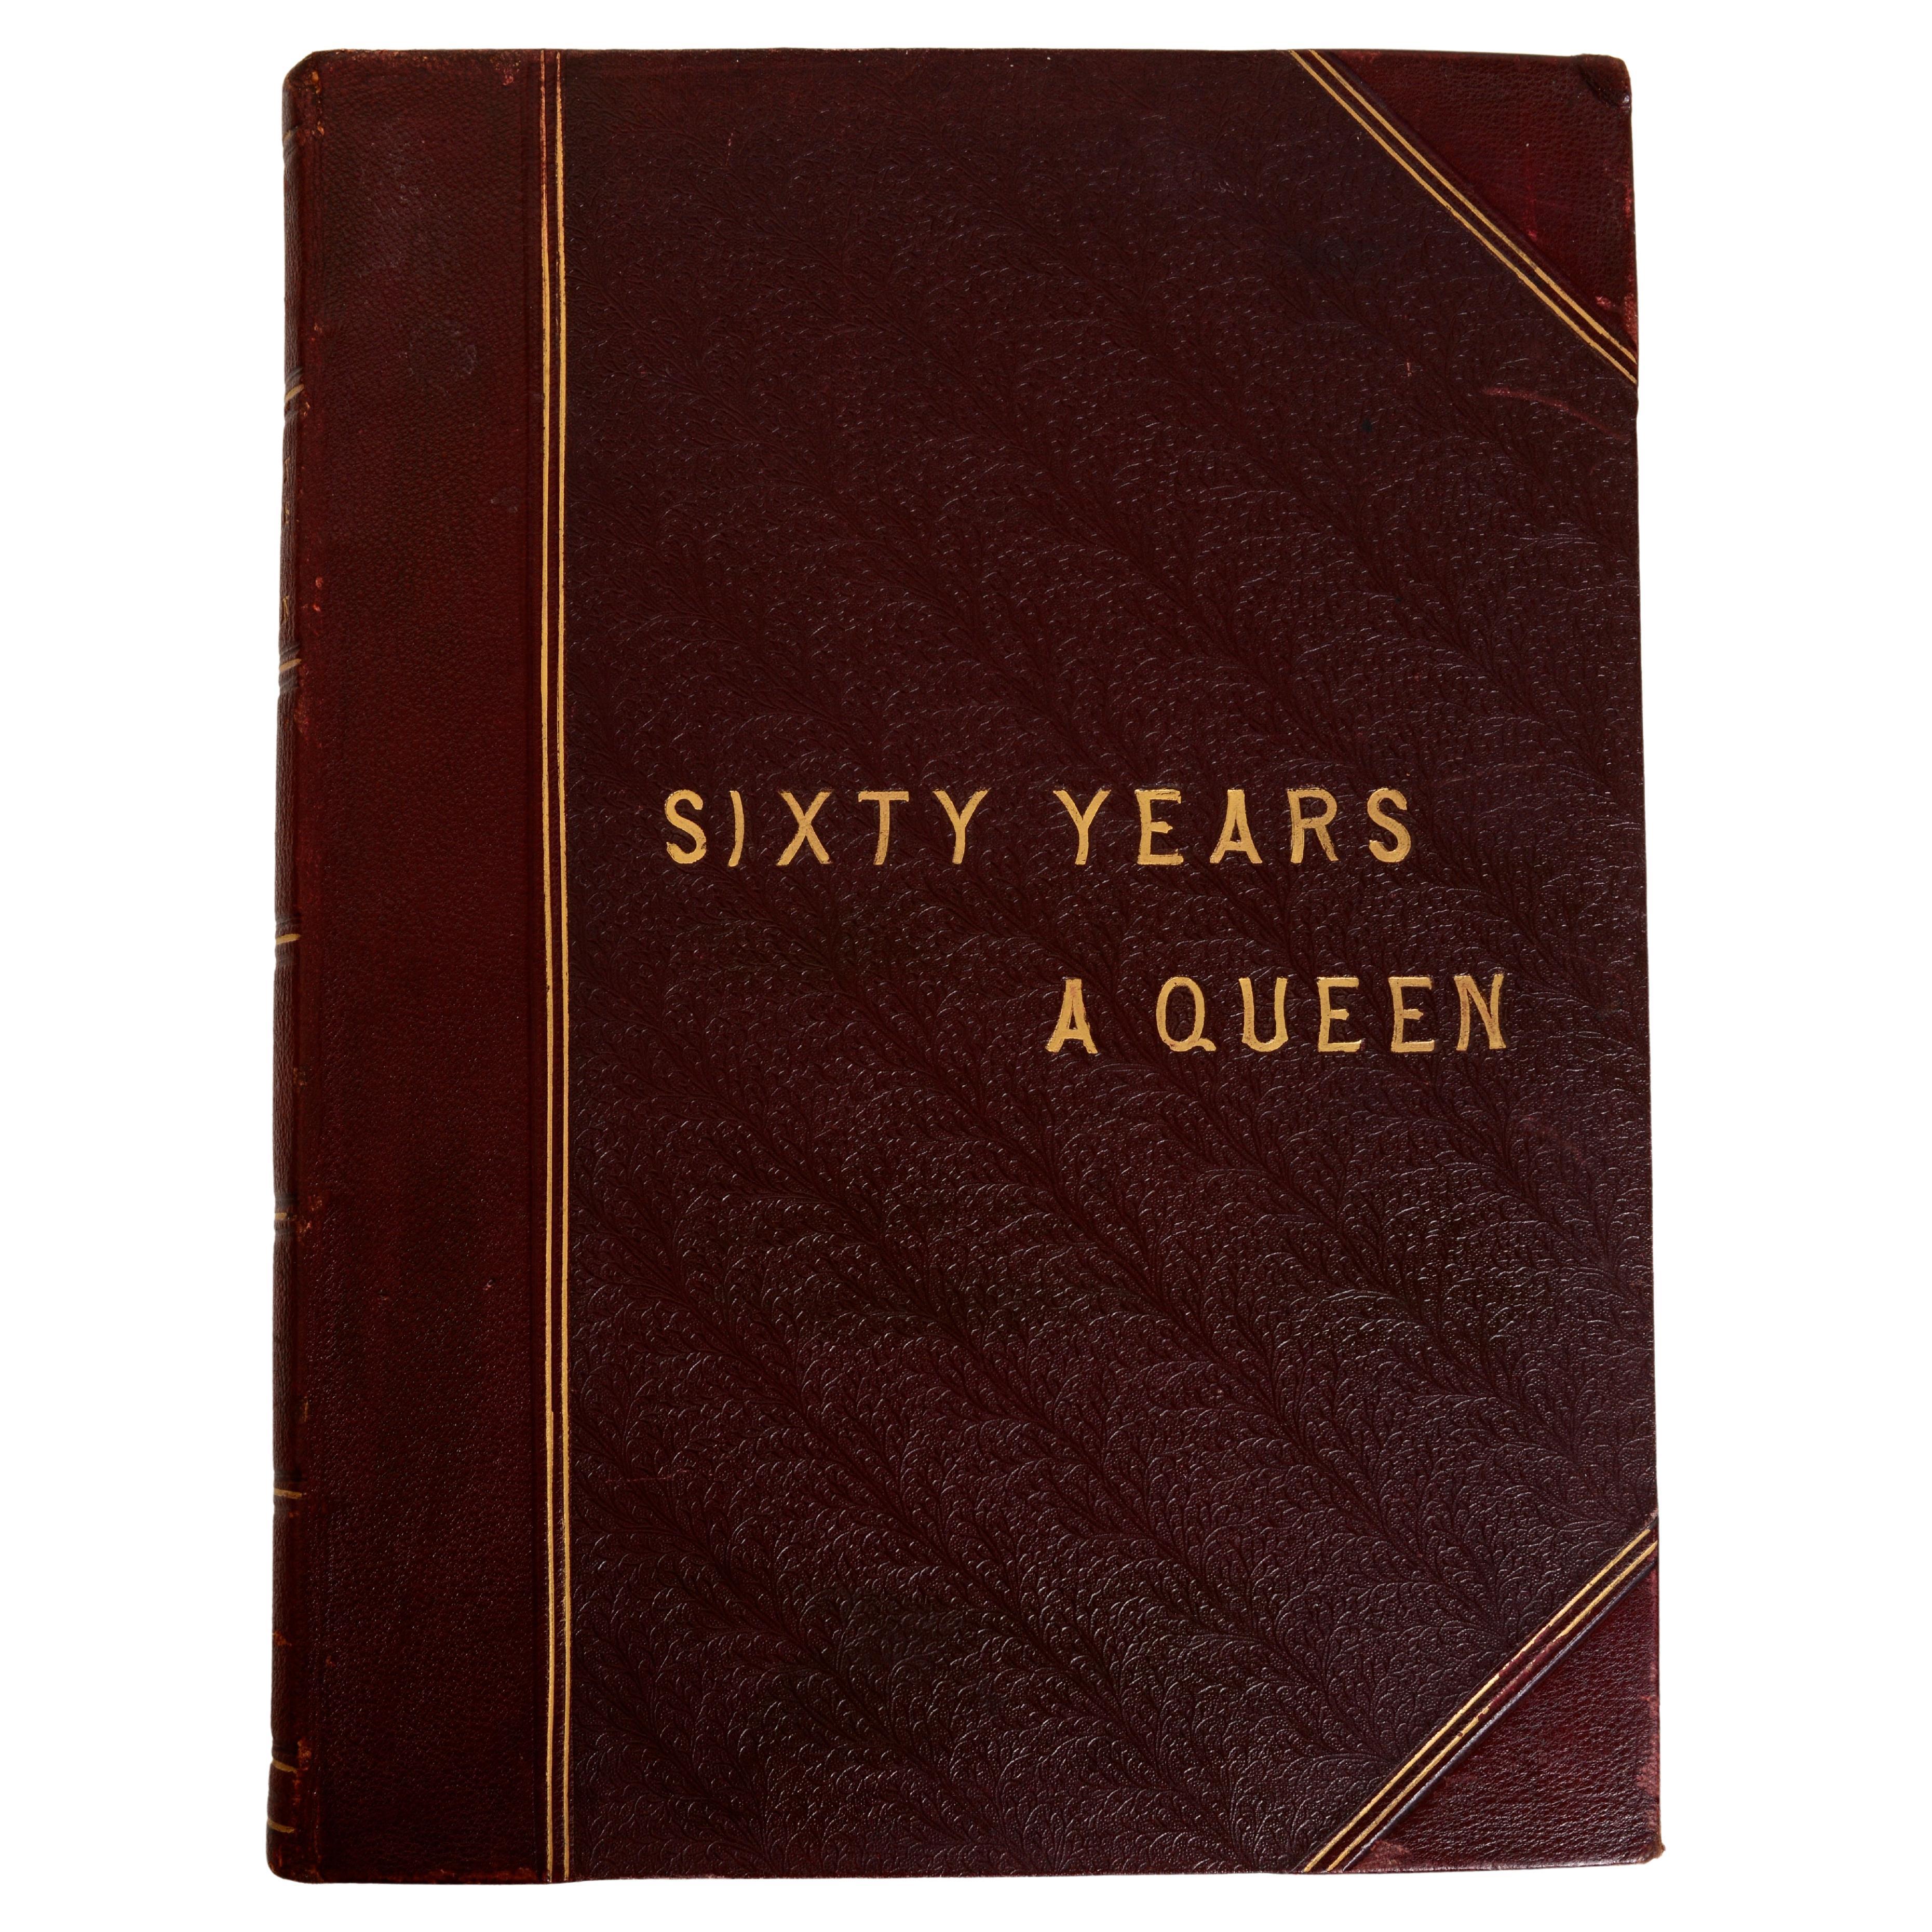 Sixty Years A Queen The Story Of Her Majesty's Reign, 1st Ed